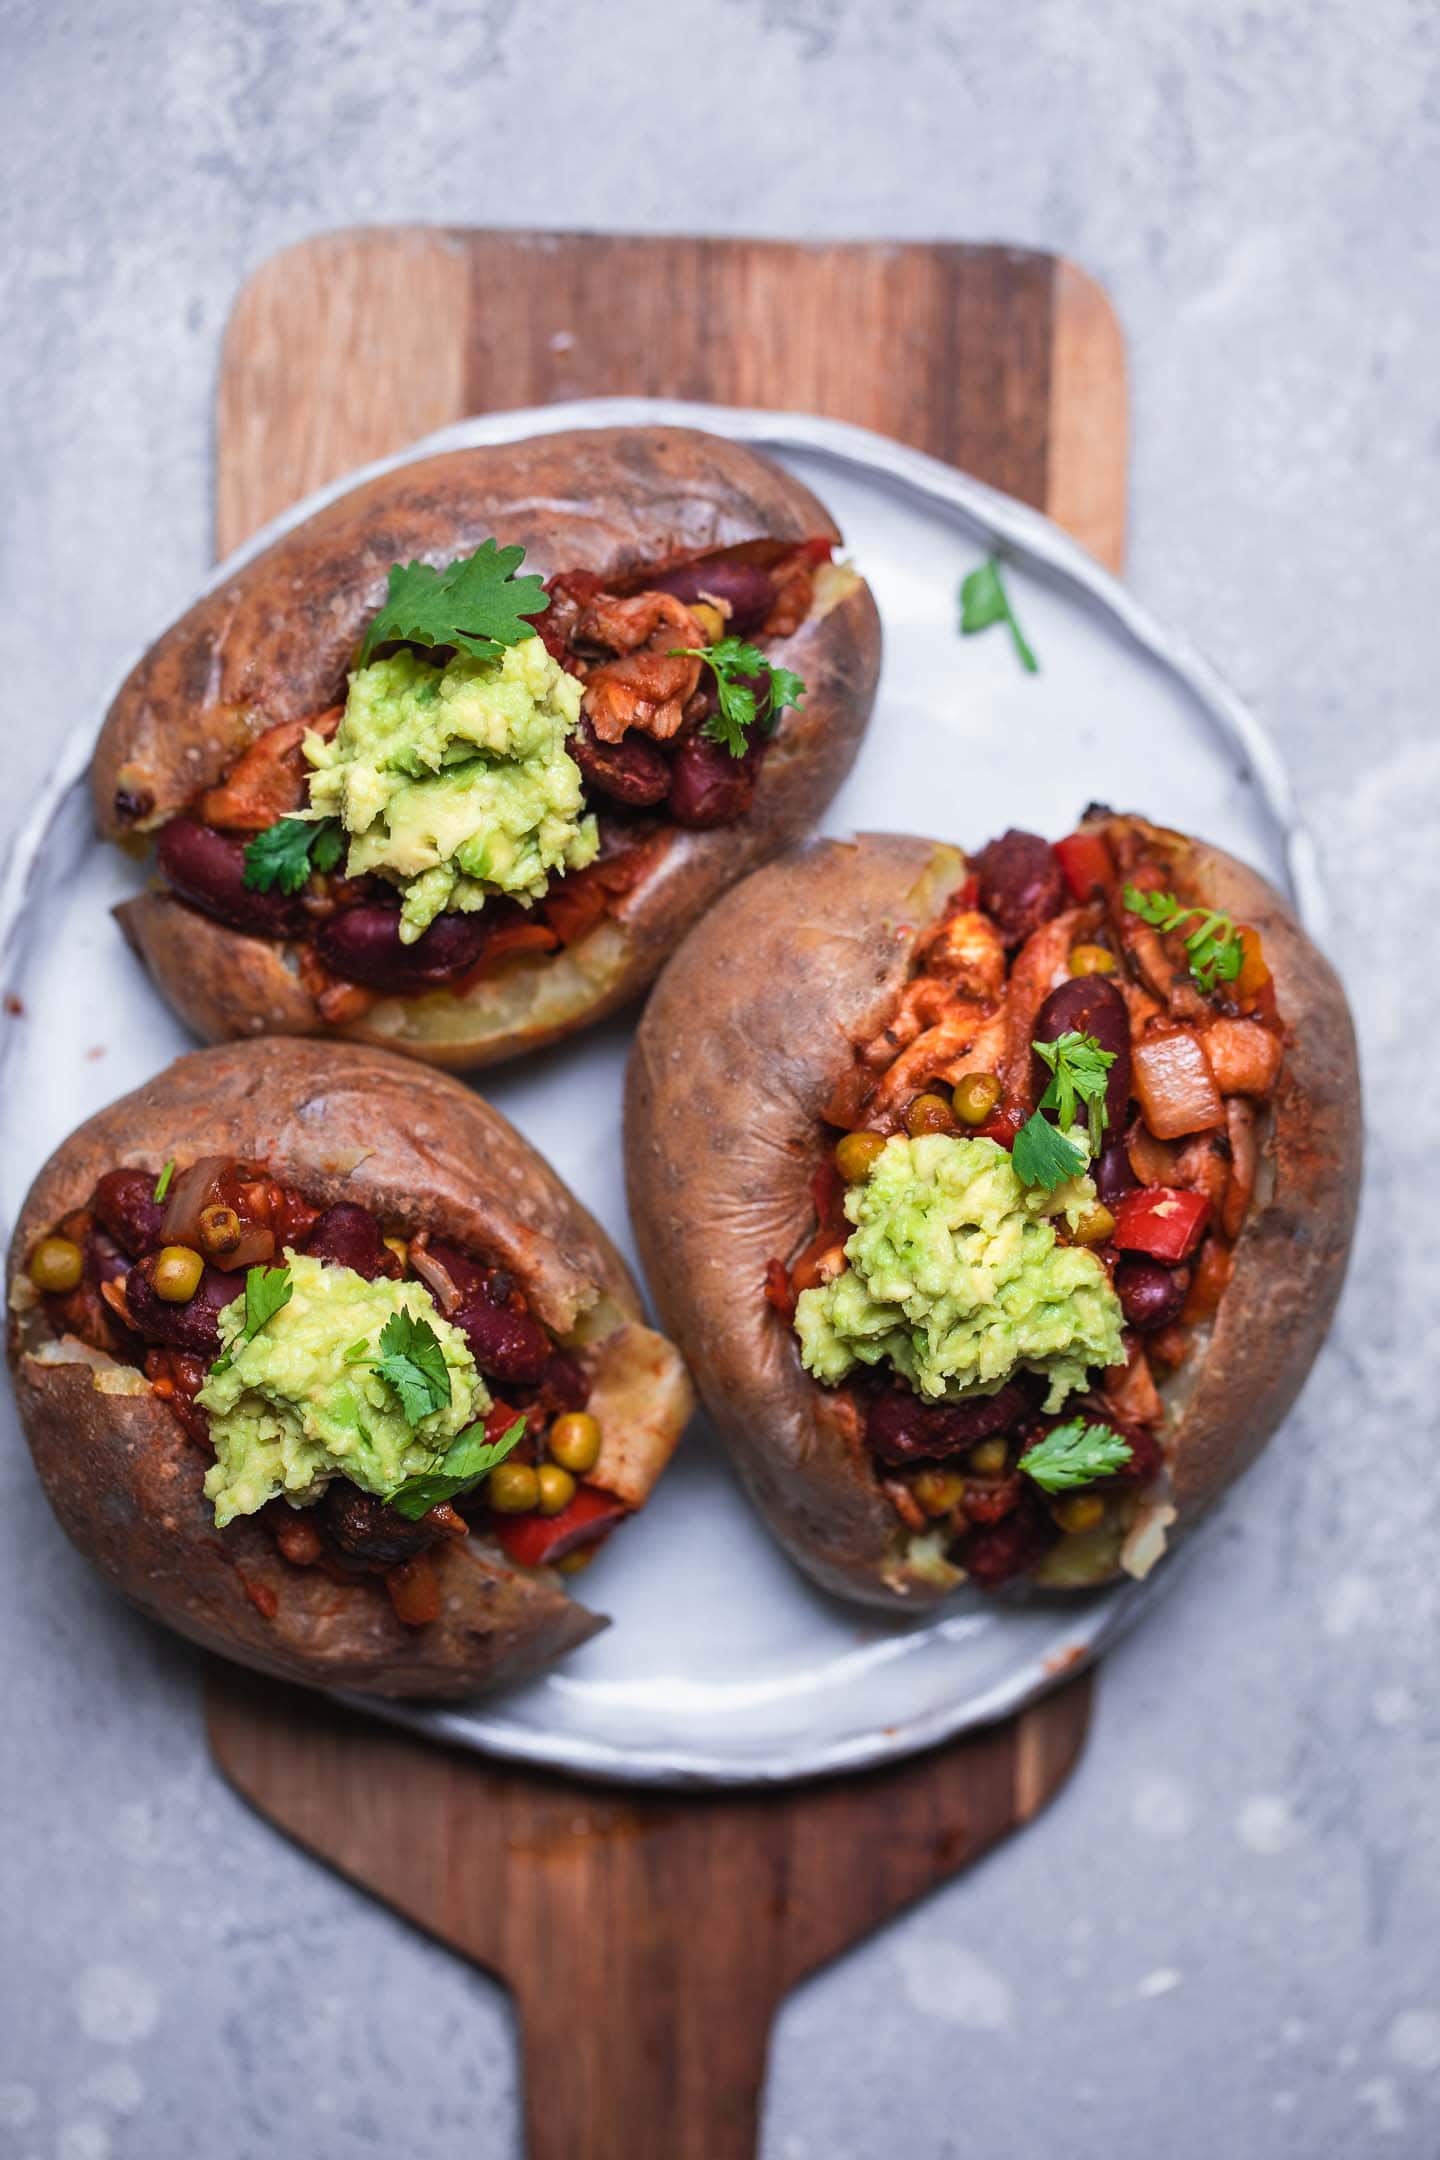 Spicy Kidney Bean Baked Potatoes